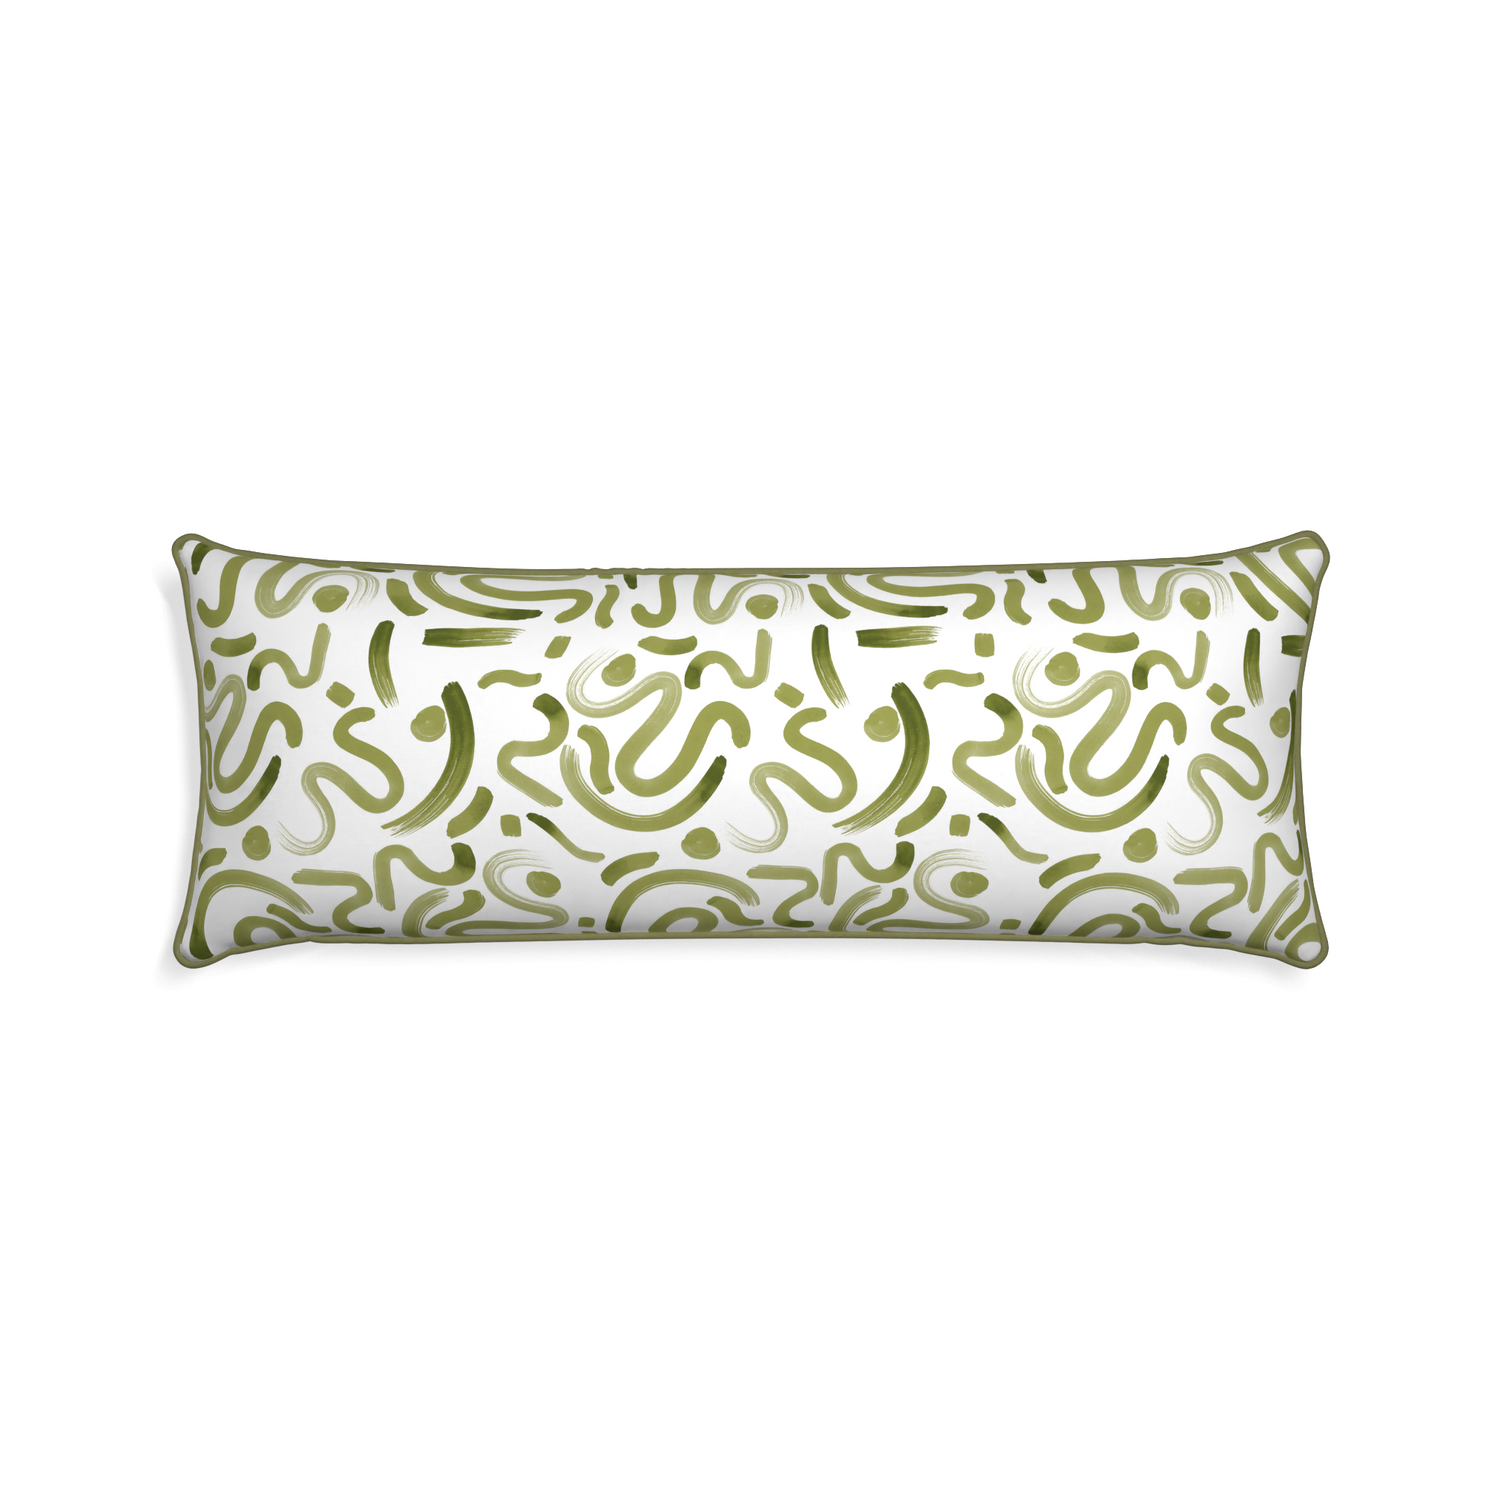 rectangle abstract moss green pillow with moss green piping